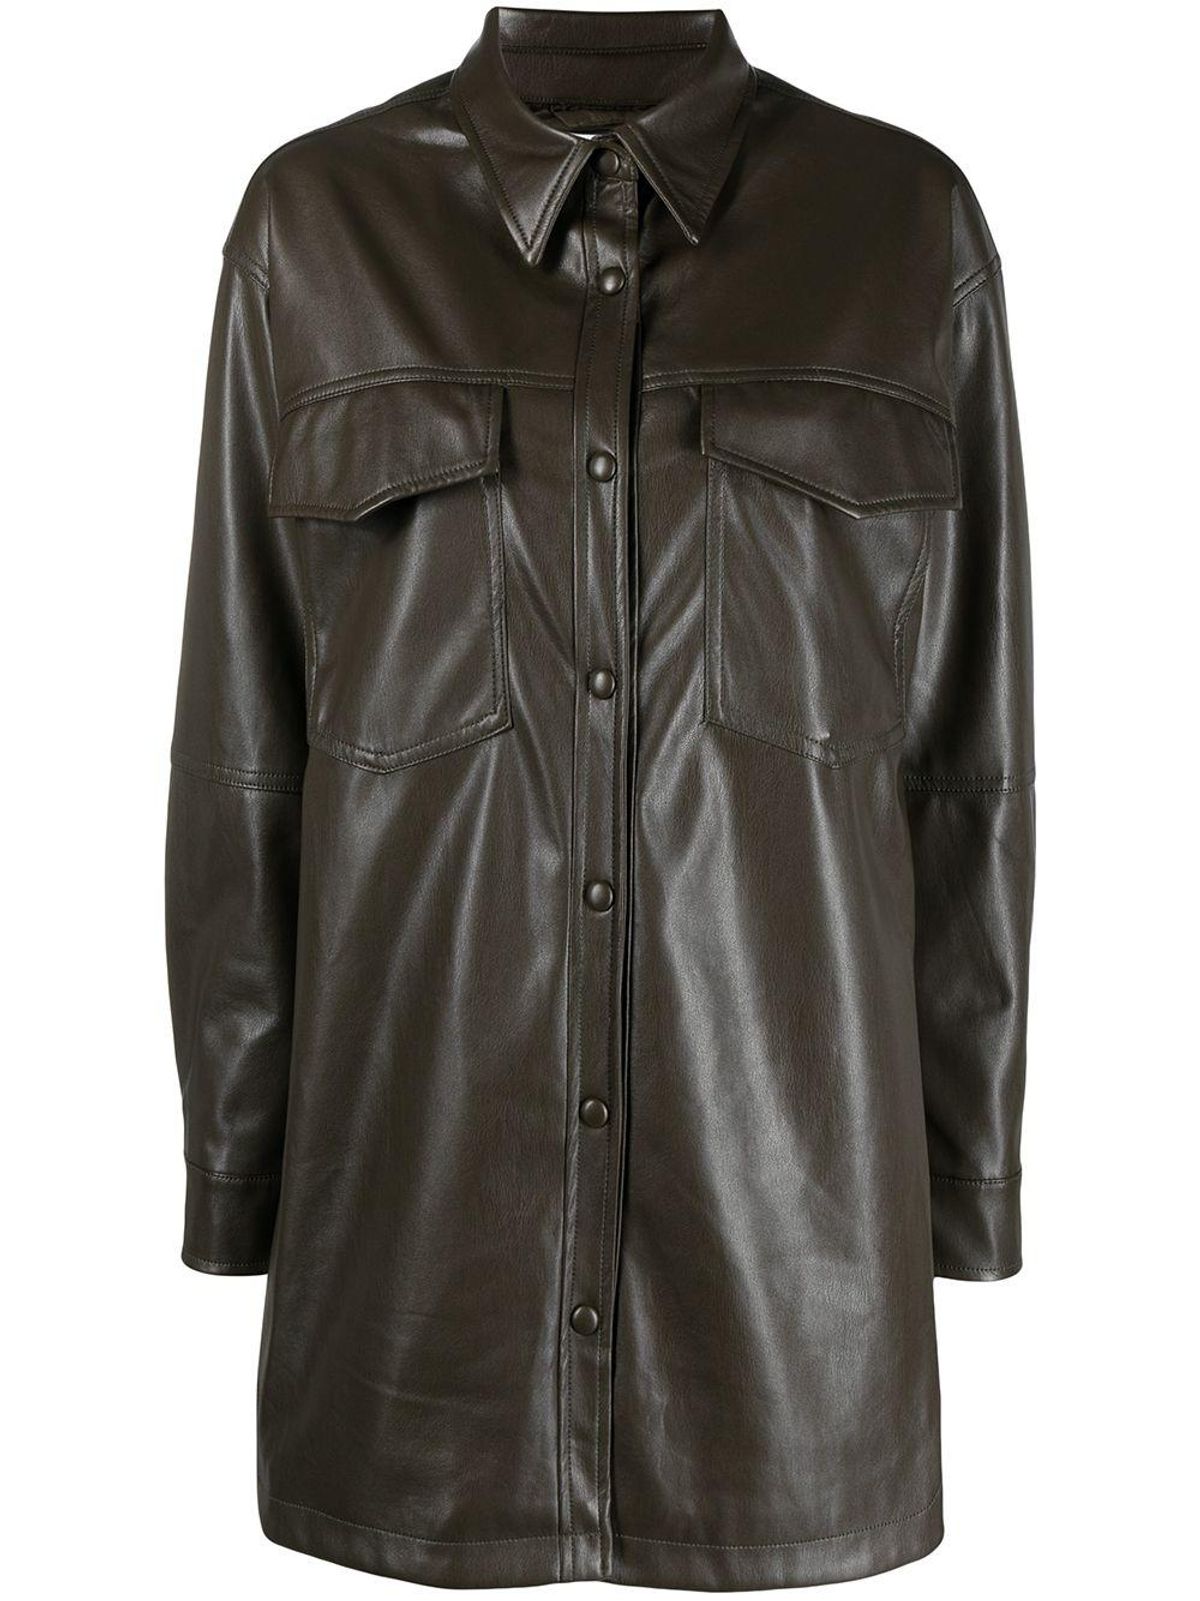 Riley Buttoned-Up Shirt Jacket